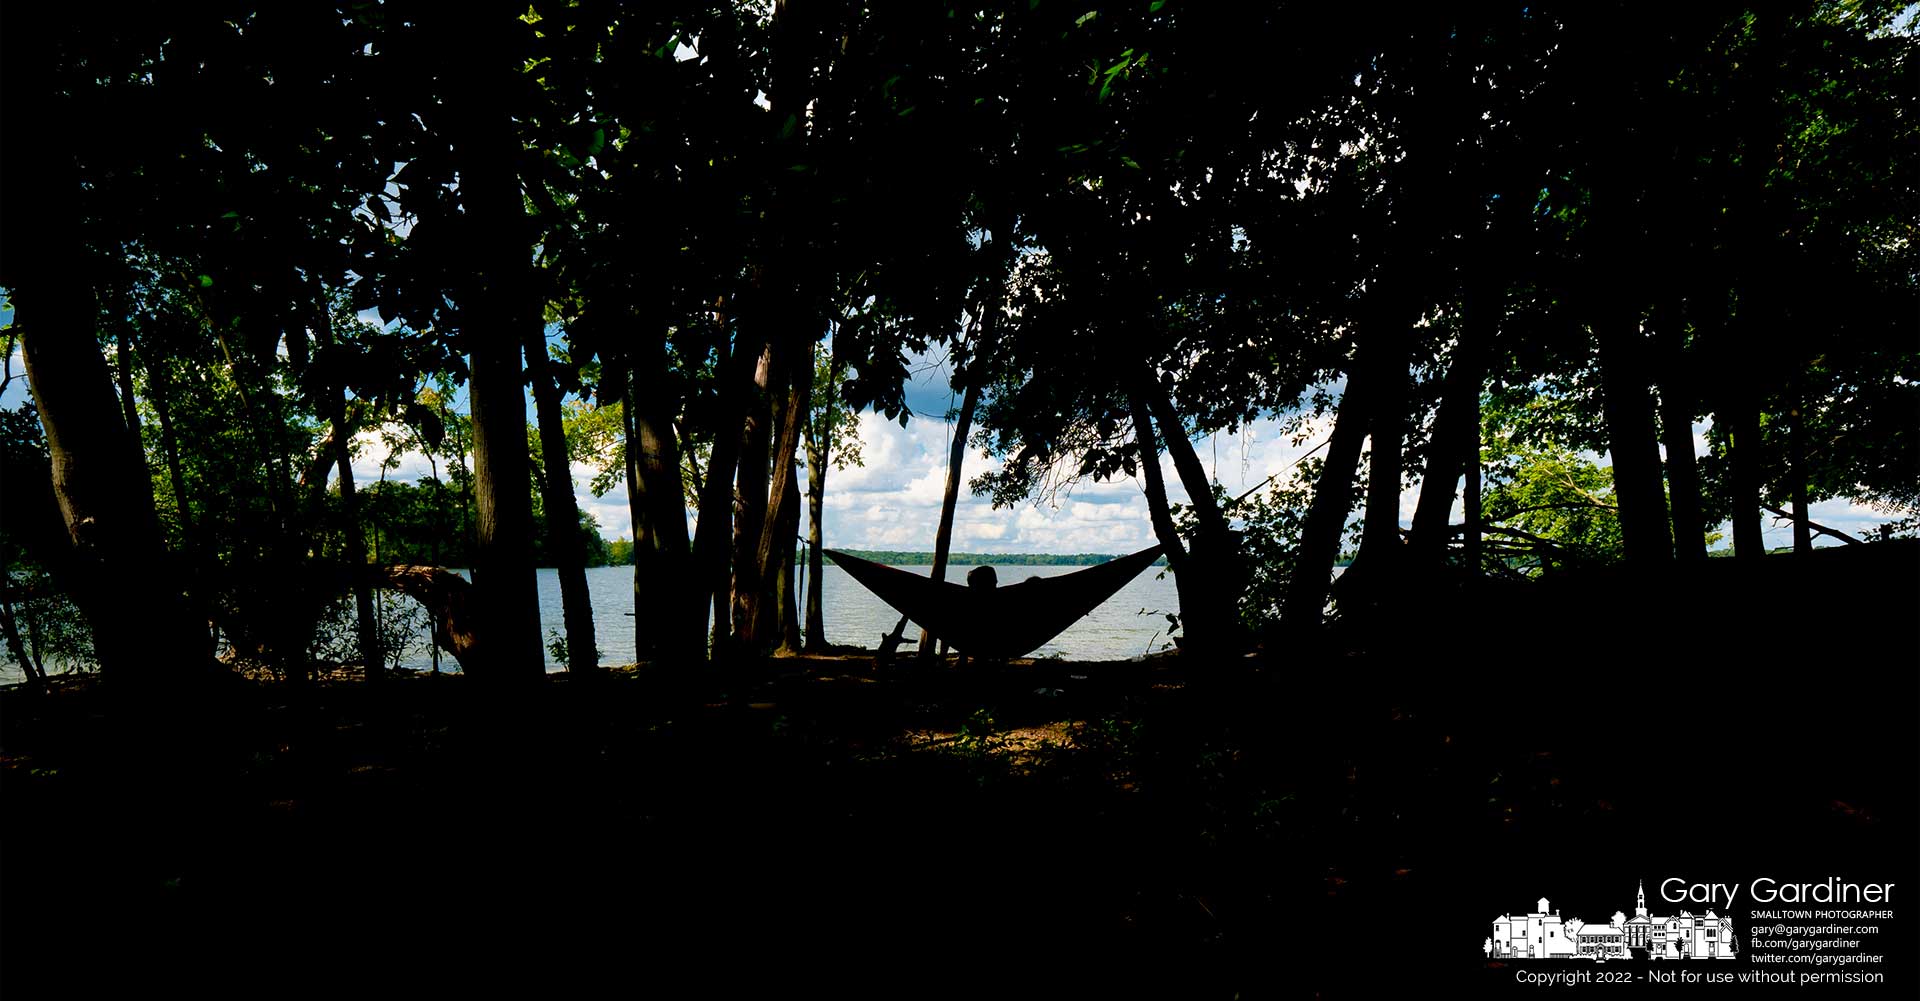 A couple rests in their hammock hanging from trees in the shade along the treeline at the northern shore of Oxbow boat ramp on Hoover Reservoir. My Final Photo for August 17, 2022.